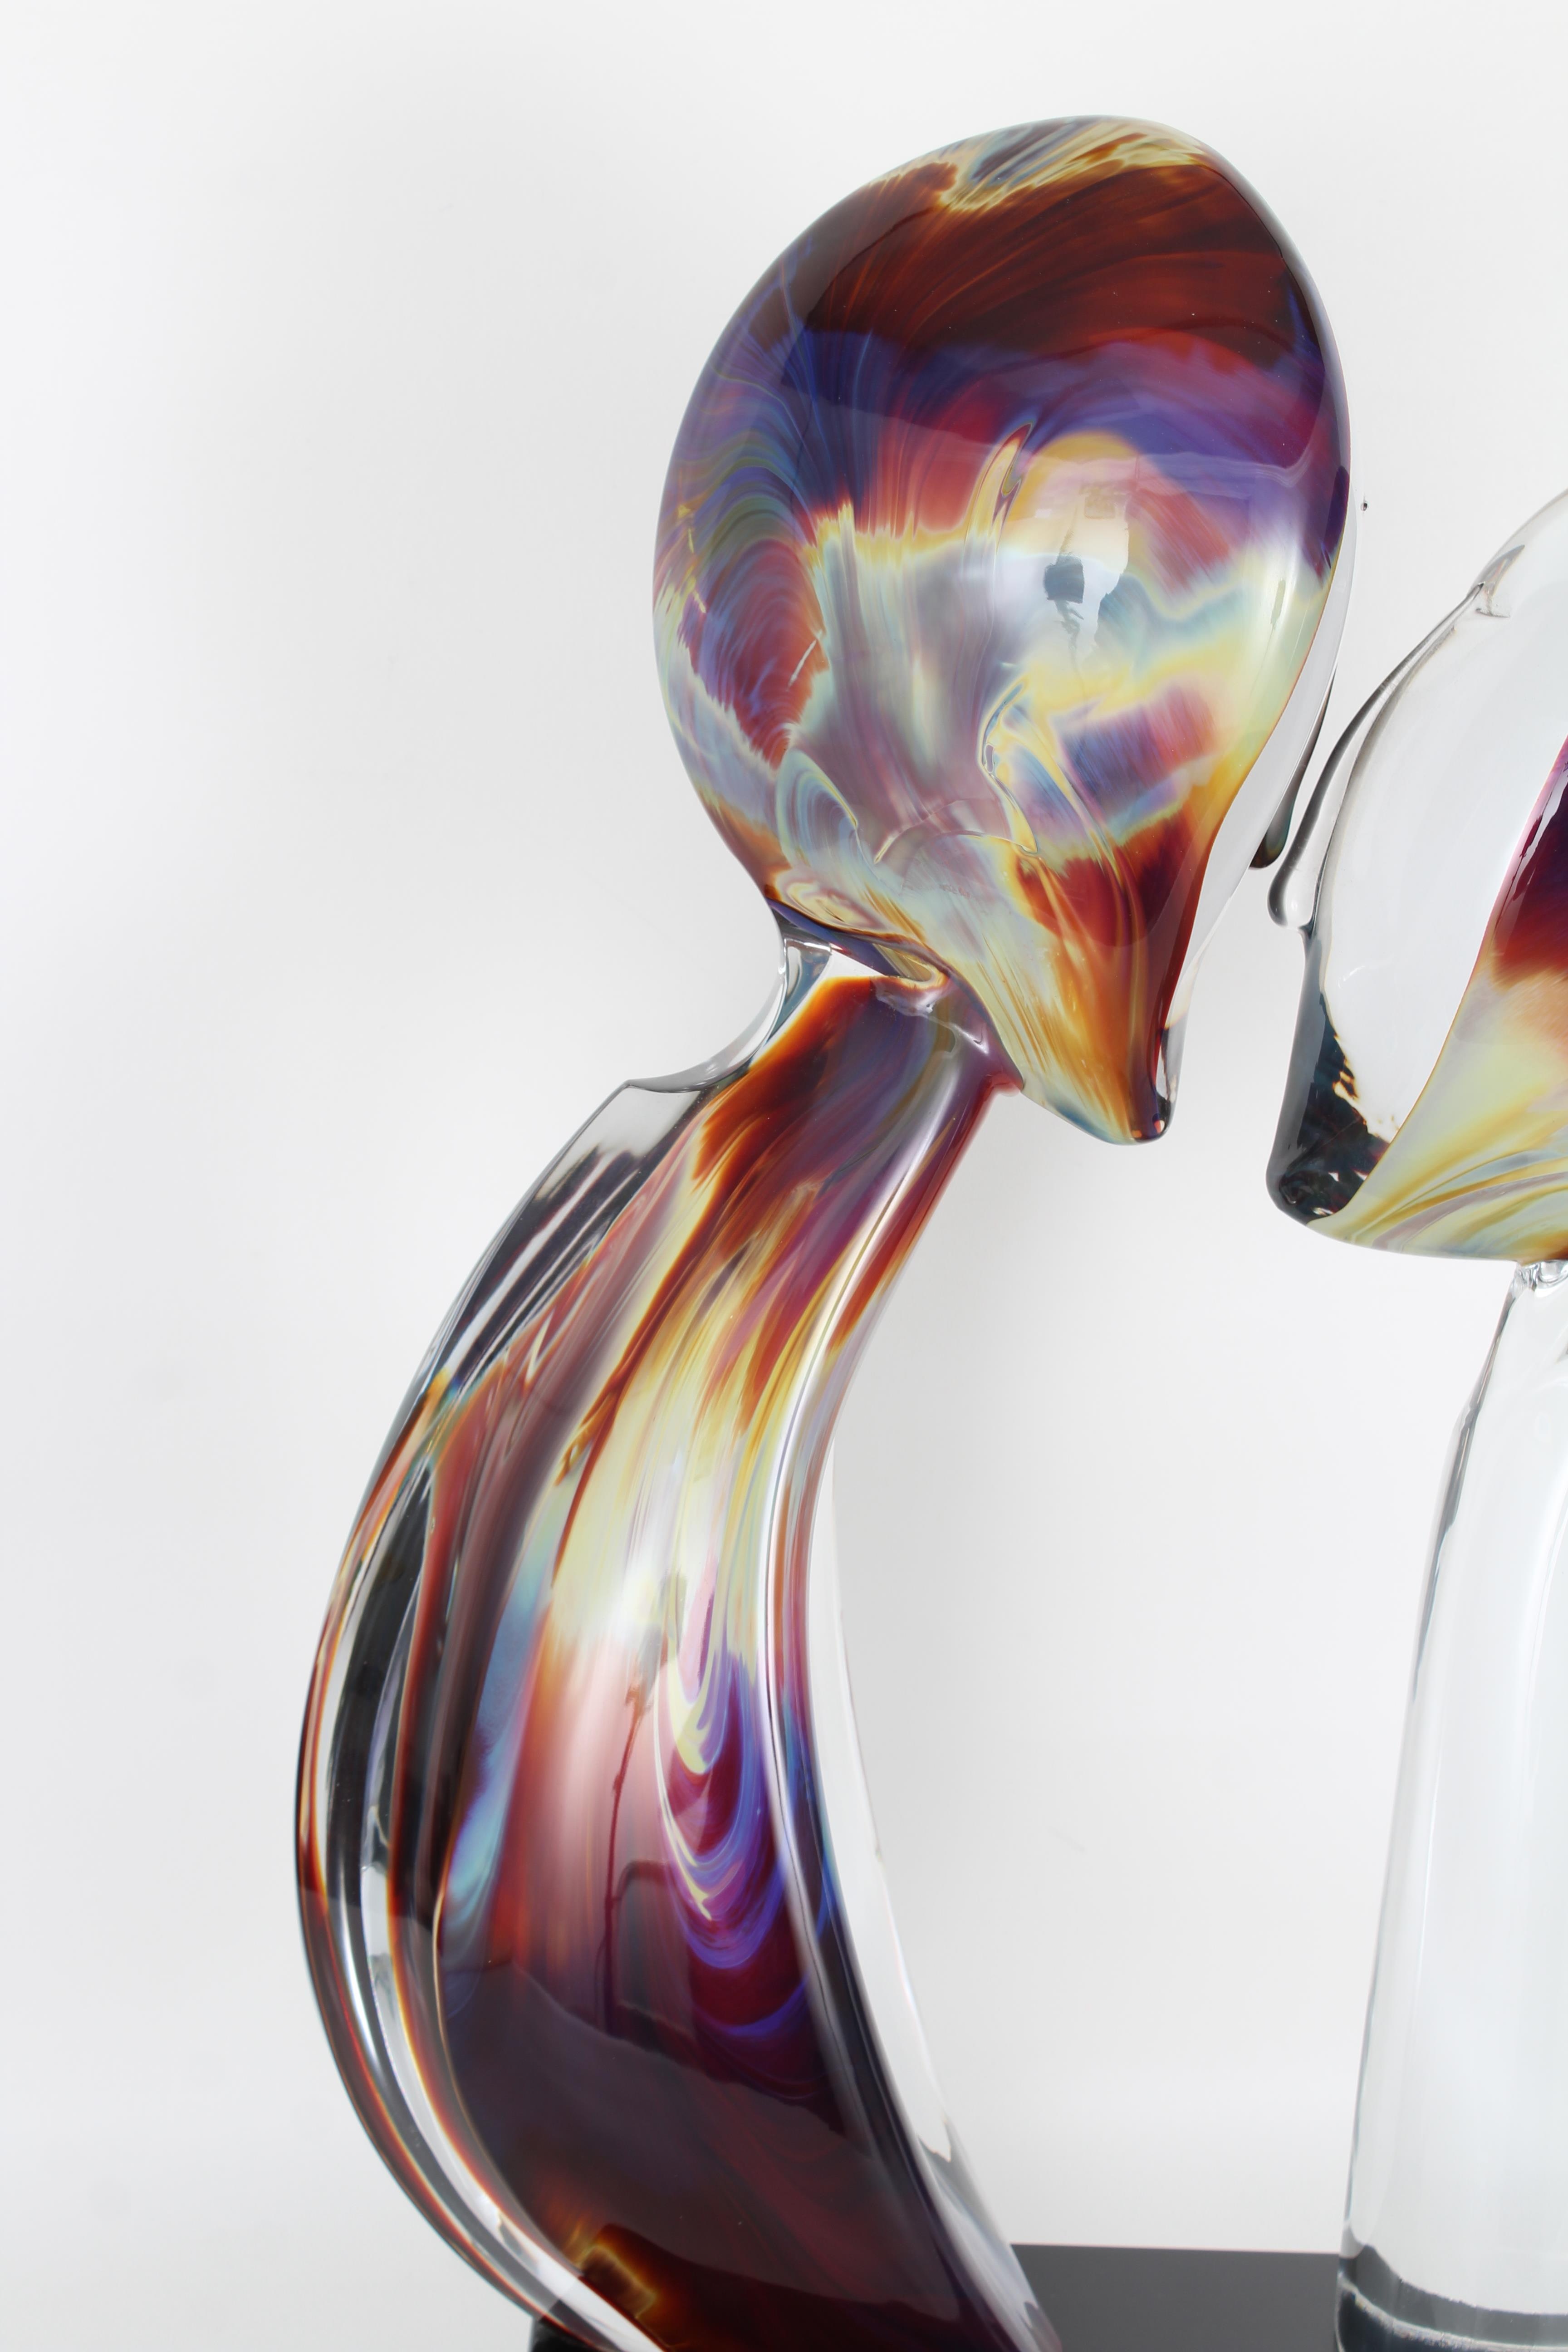 Dino Rosin "The Kiss" Glass Sculpture - Image 7 of 9